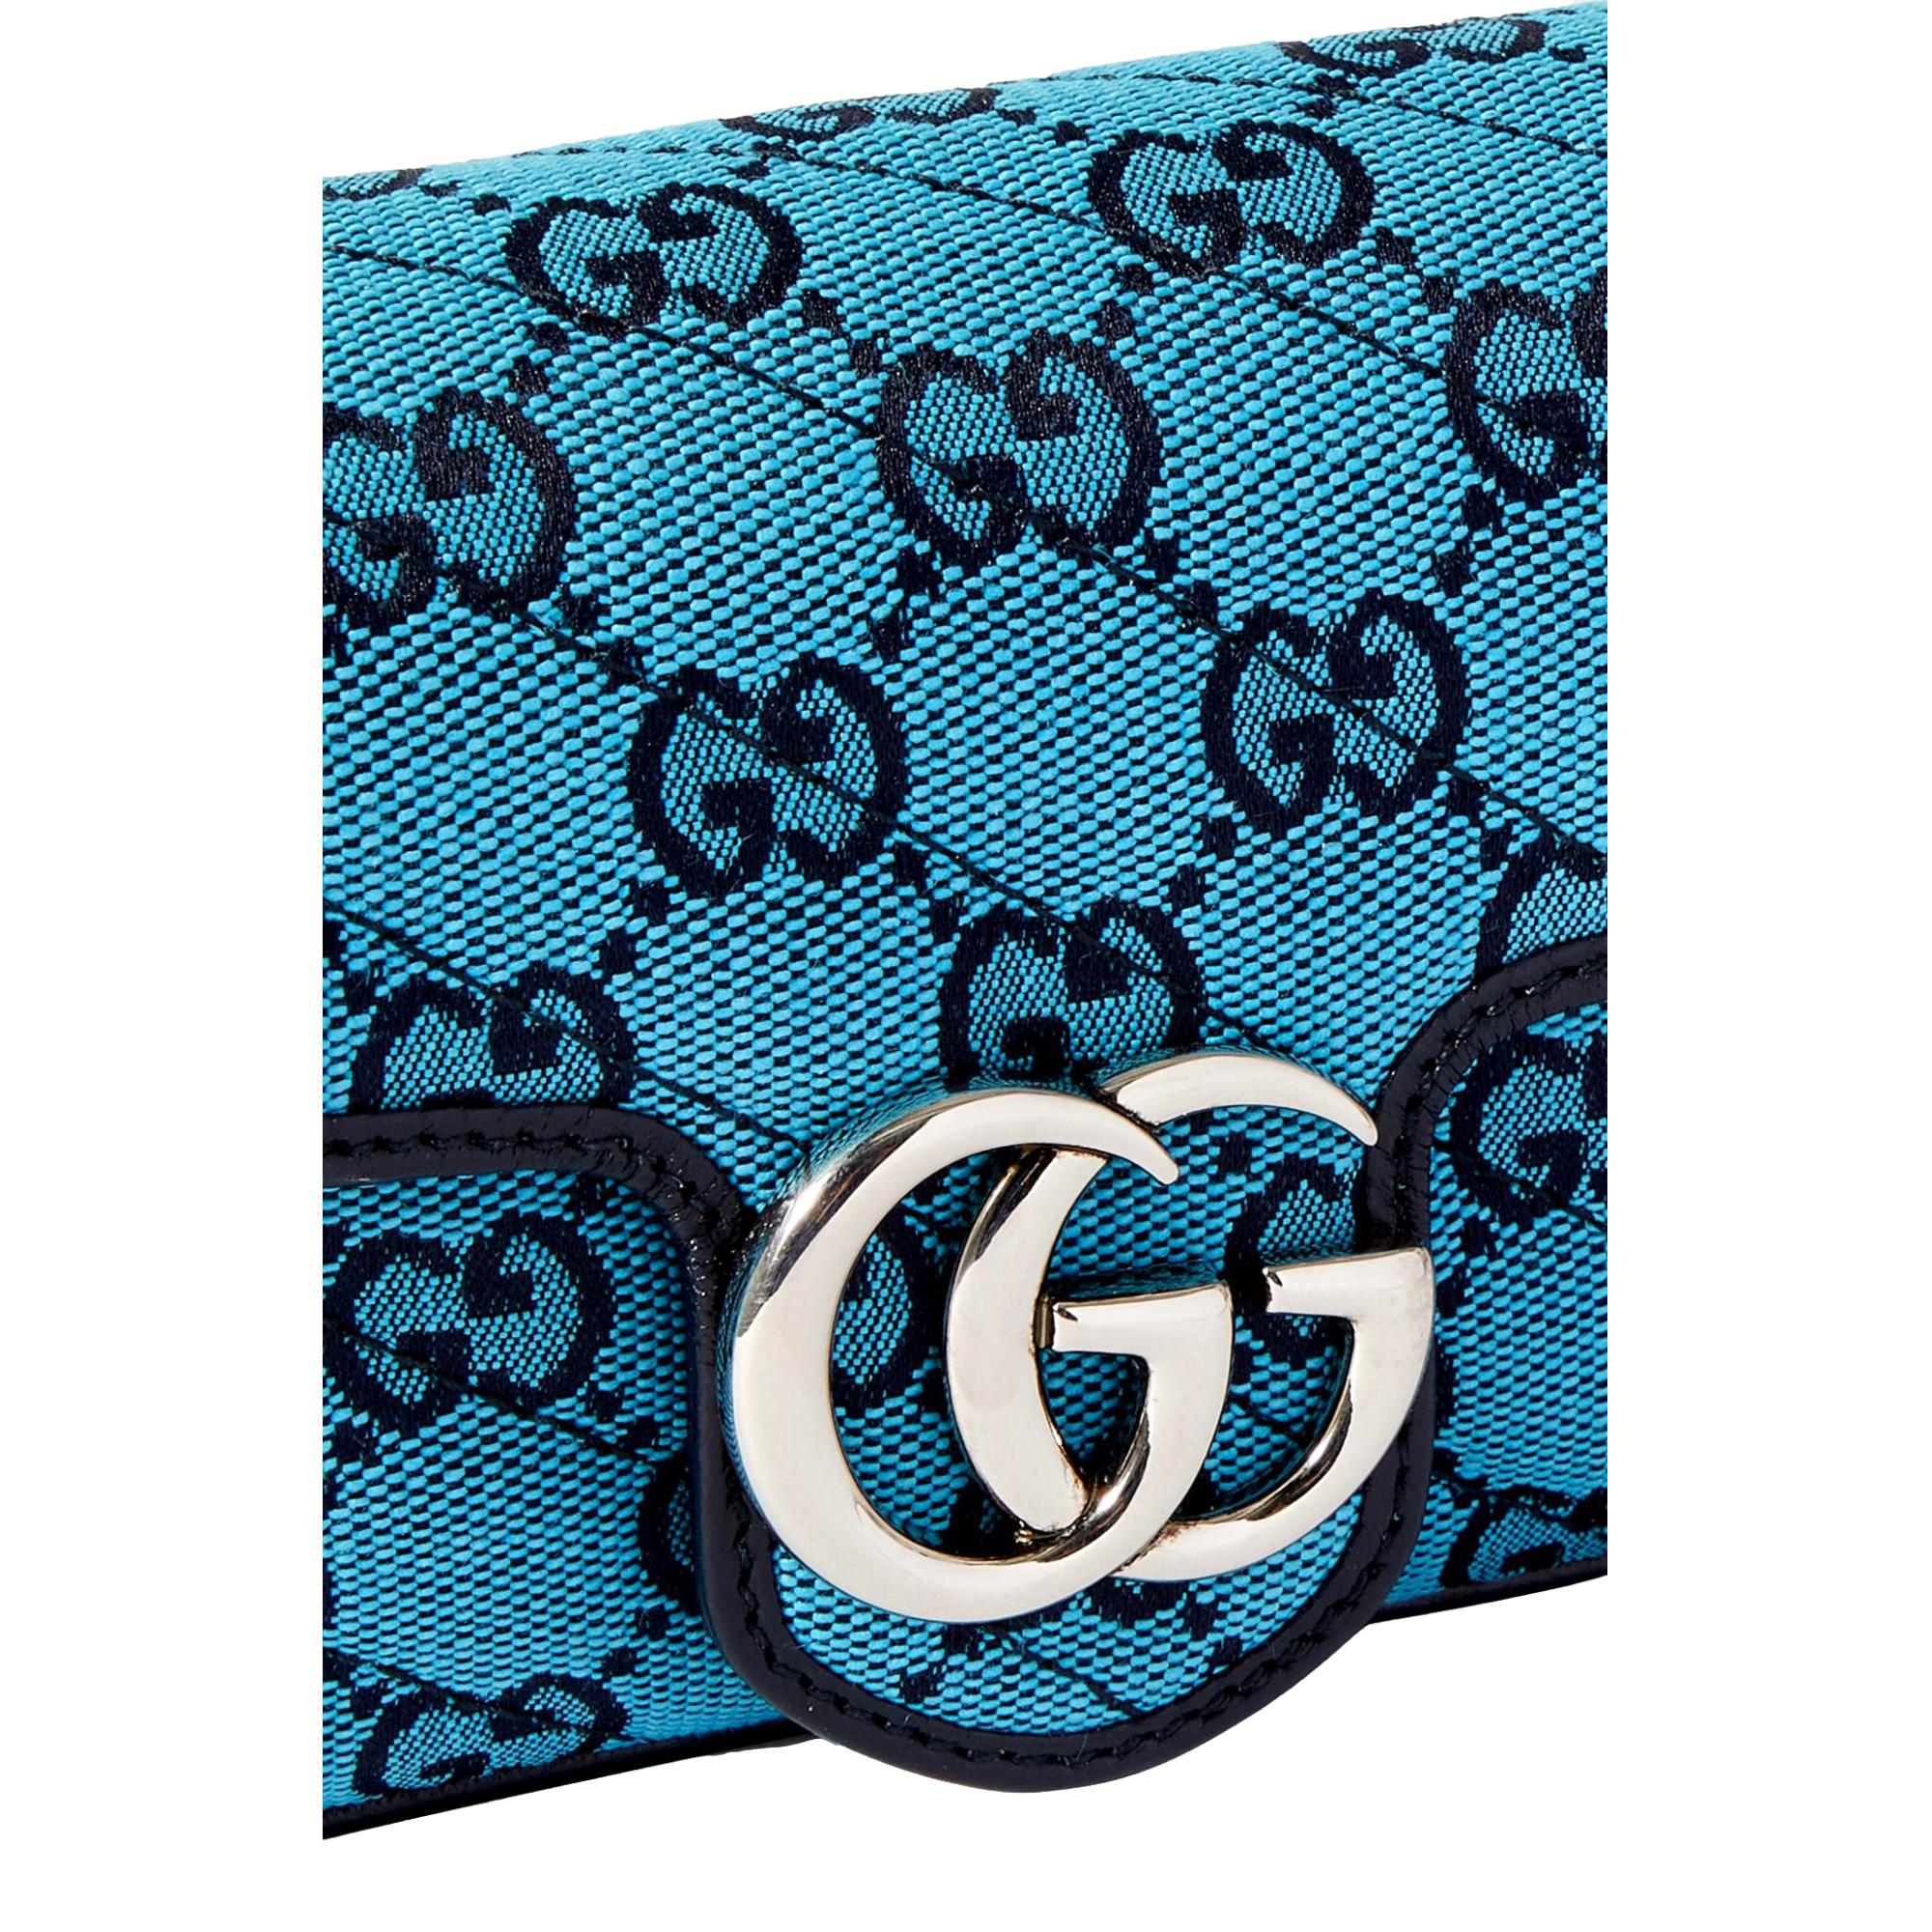 Gucci Flap Marmont Matelasse Blue Printed Canvas Shoulder Bag 443497 at_Queen_Bee_of_Beverly_Hills